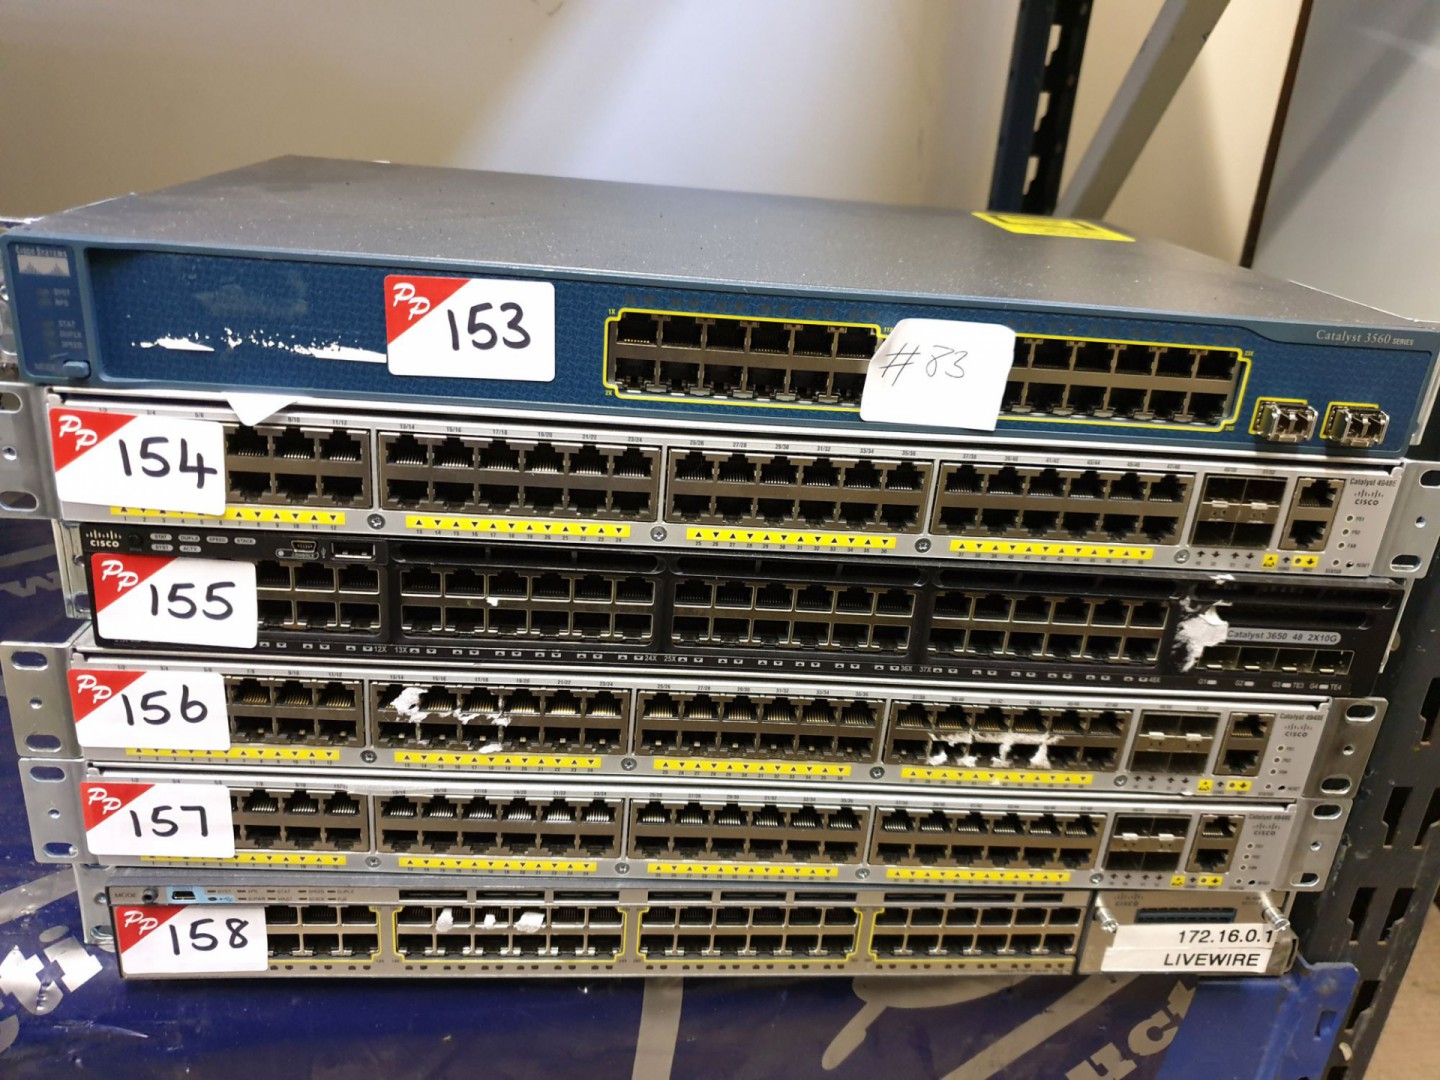 Cisco Systems Catalyst 4948E network switch